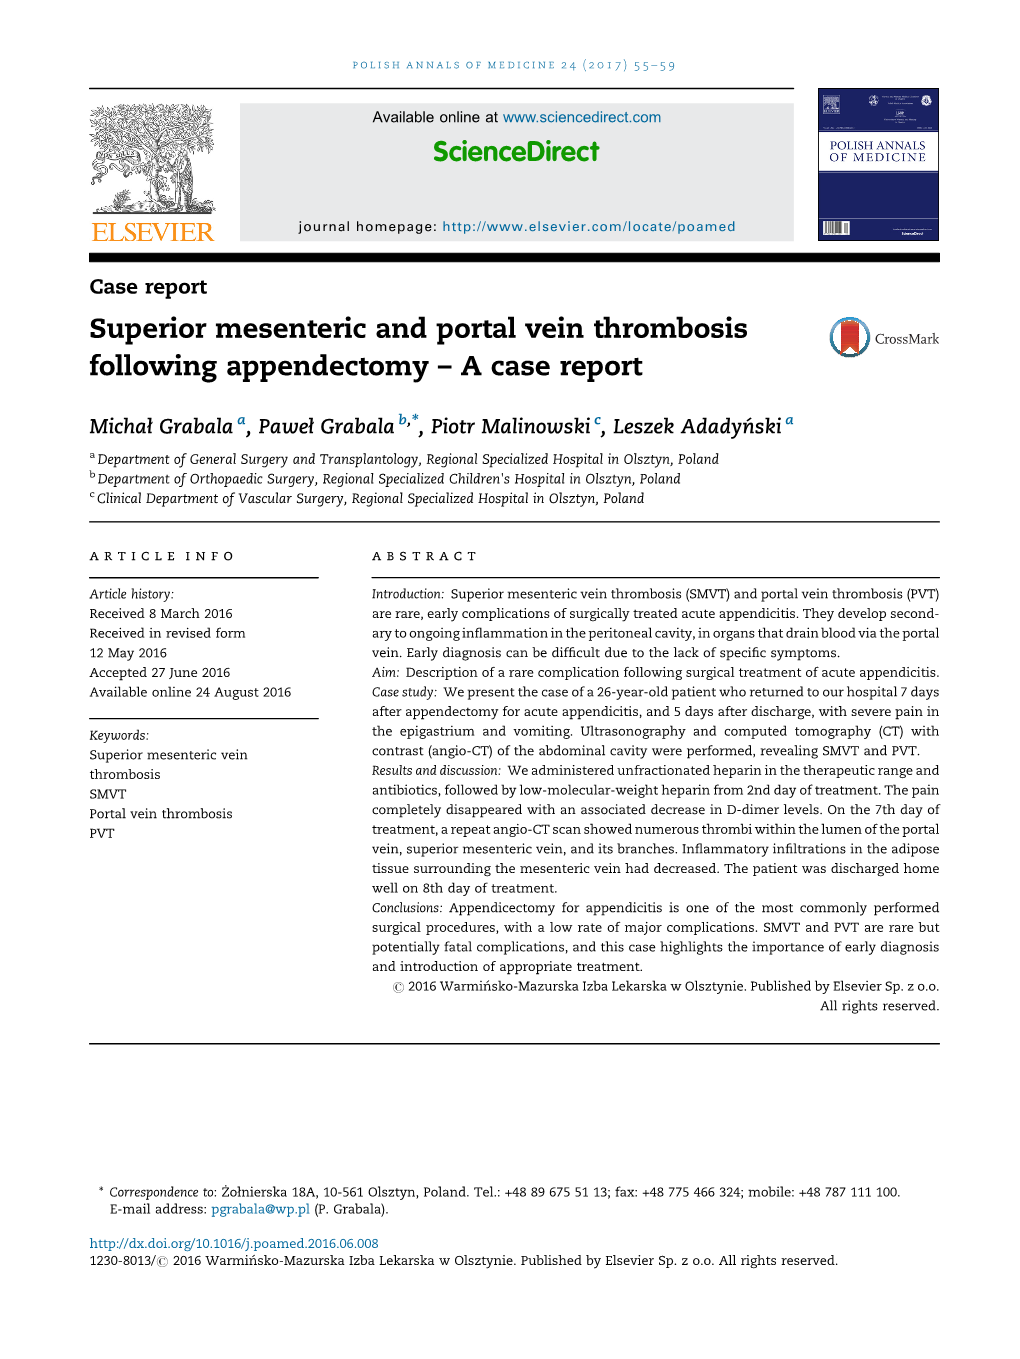 Superior Mesenteric and Portal Vein Thrombosis Following Appendectomy – a Case Report